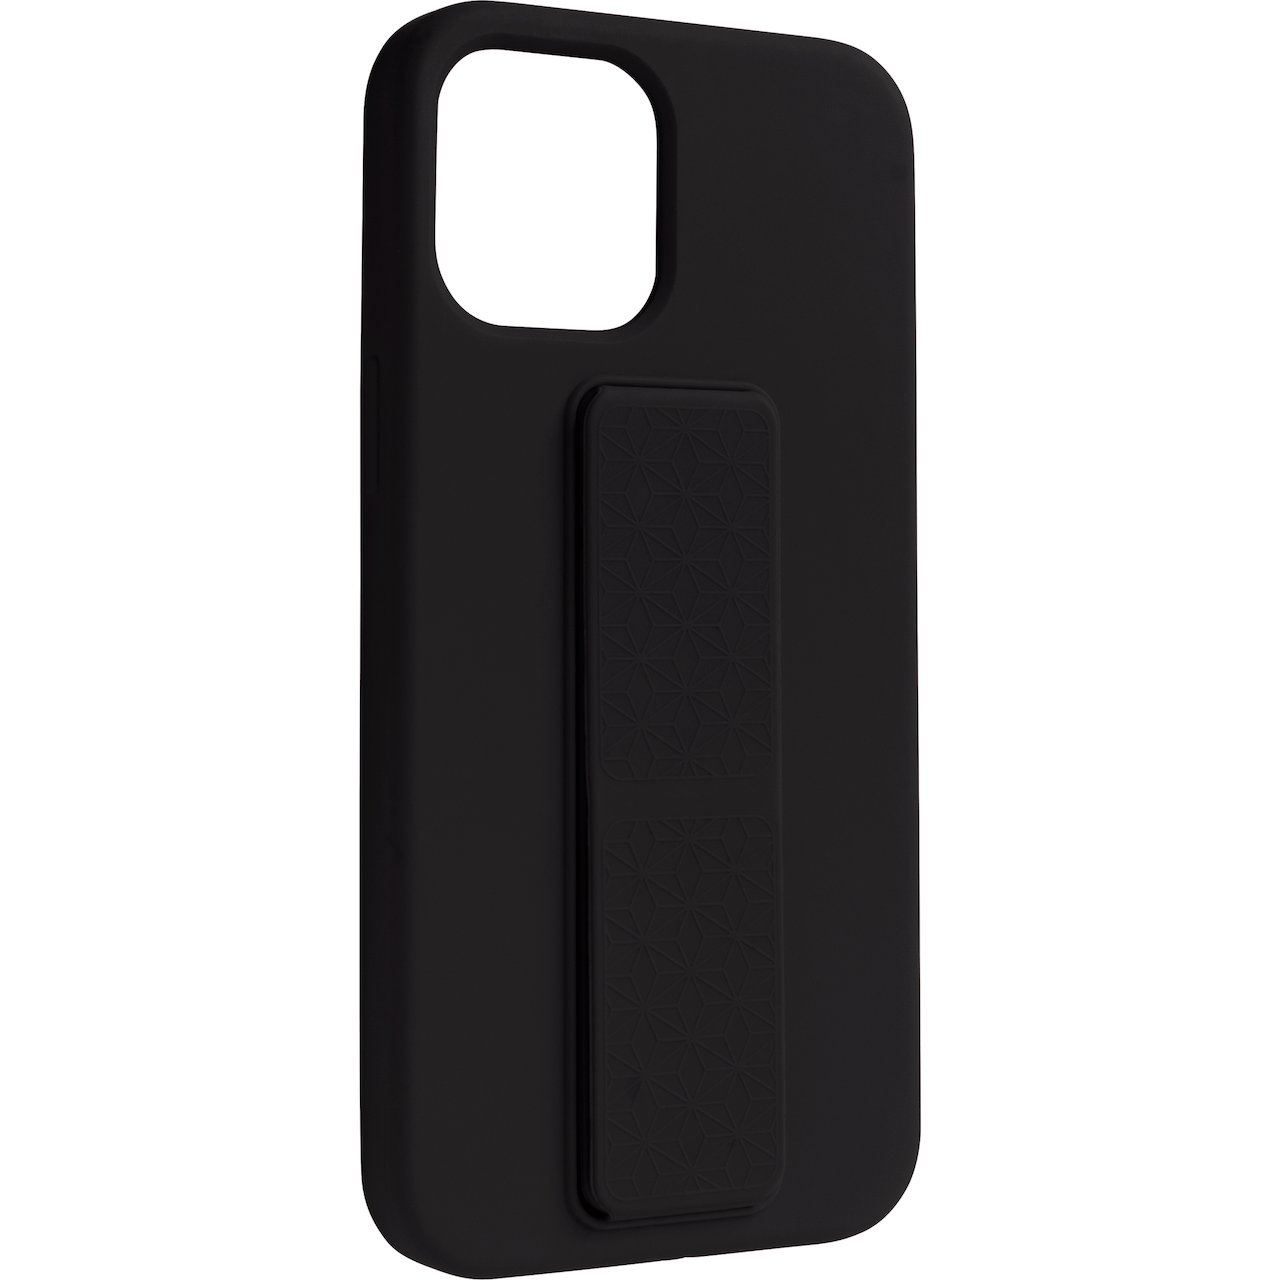 LEKI BYCPH COVER TIL IPHONE 13 PRO GRIP AND STAND SILIKON SORT